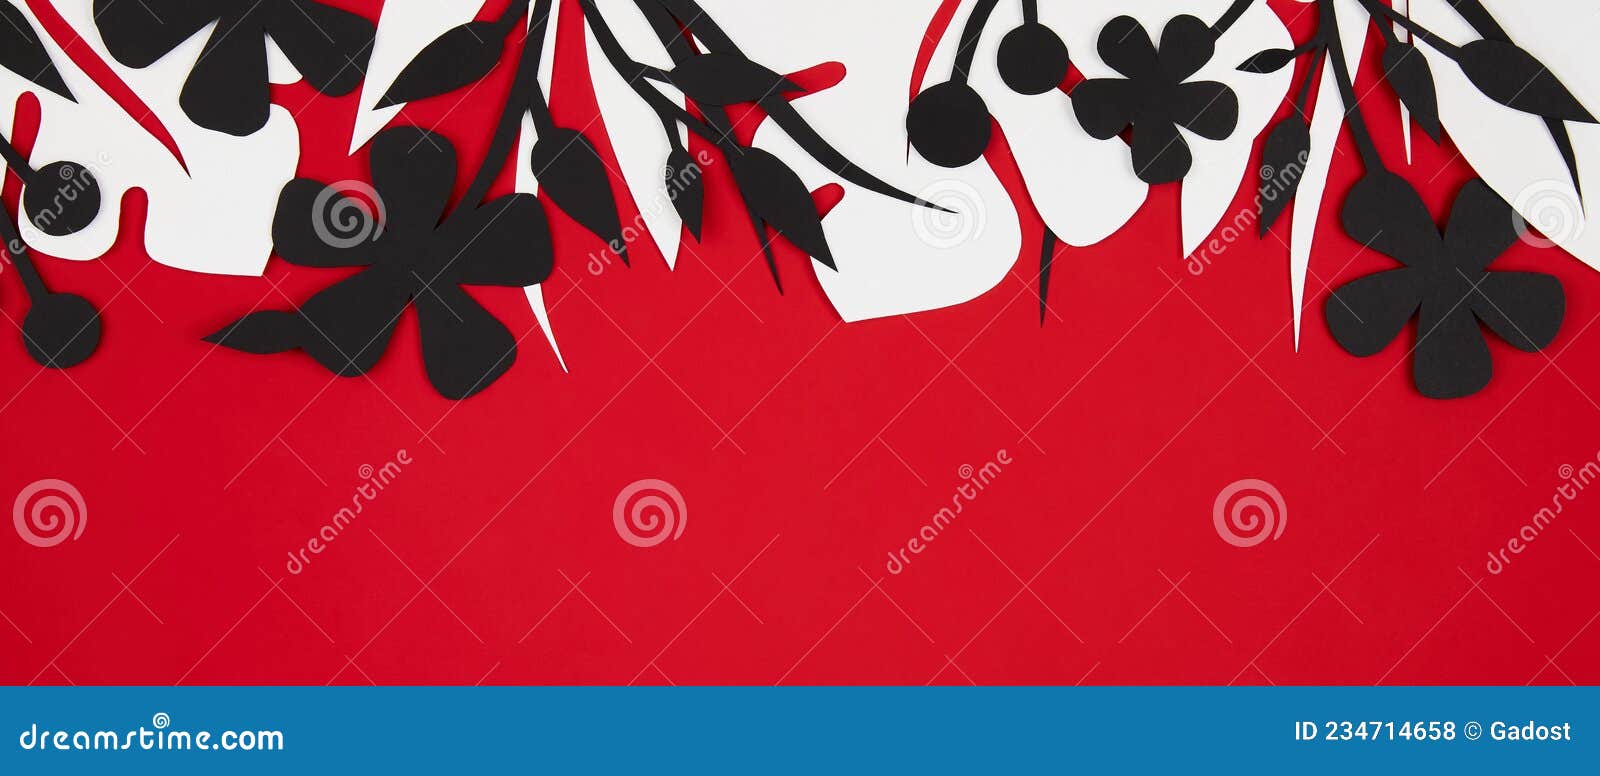 Red Banner with White and Black Floral Paper Decor Stock Photo